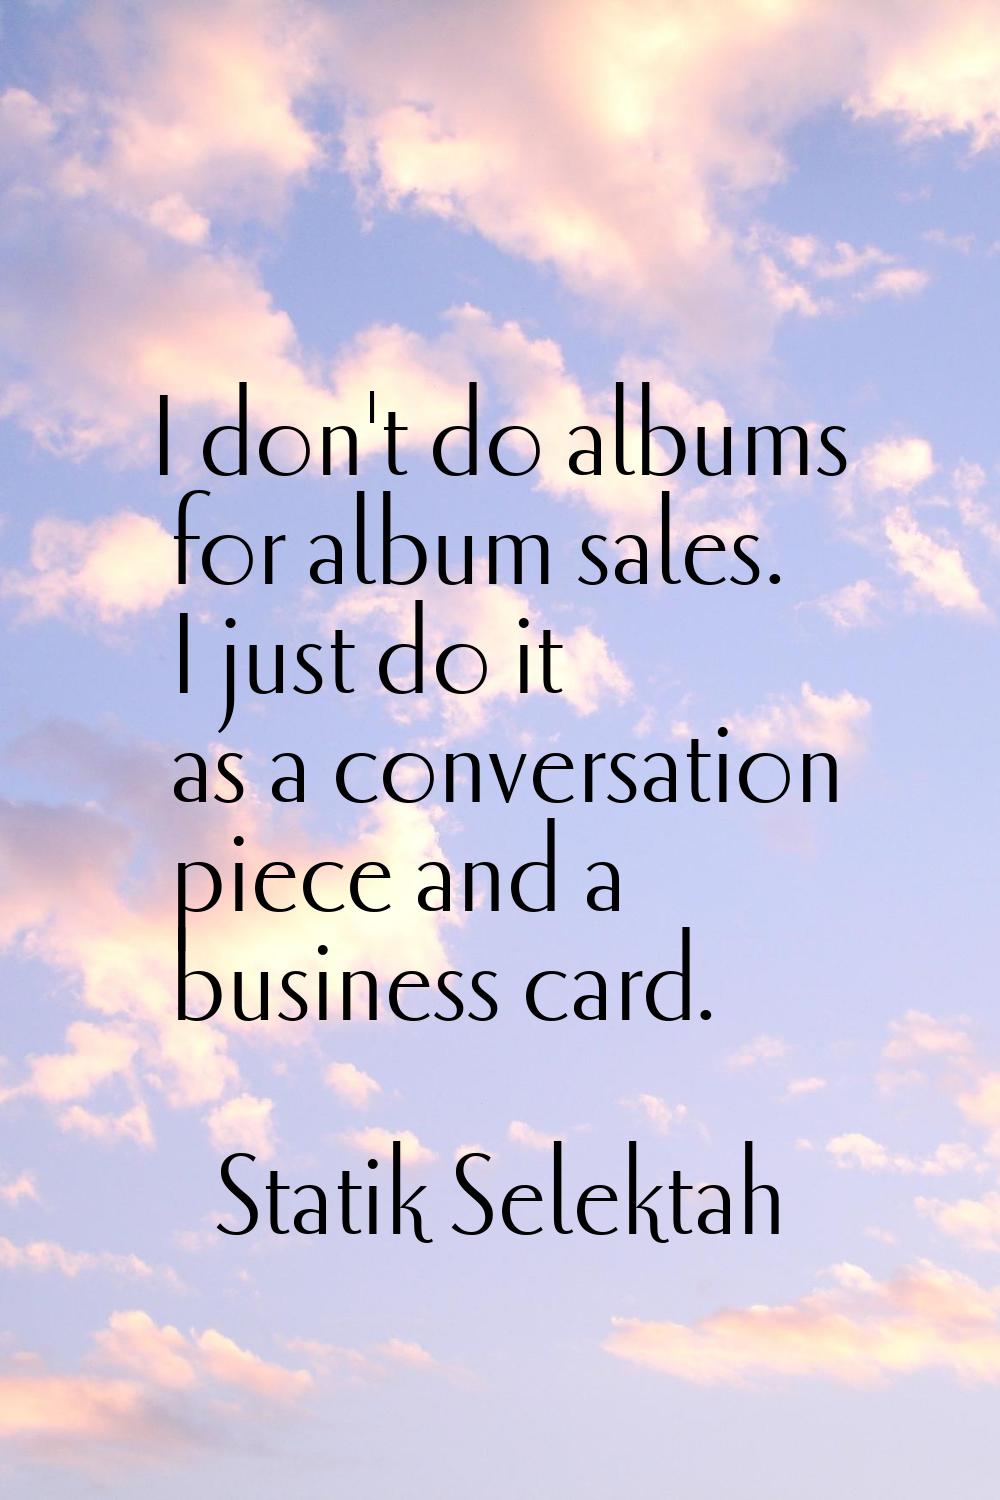 I don't do albums for album sales. I just do it as a conversation piece and a business card.